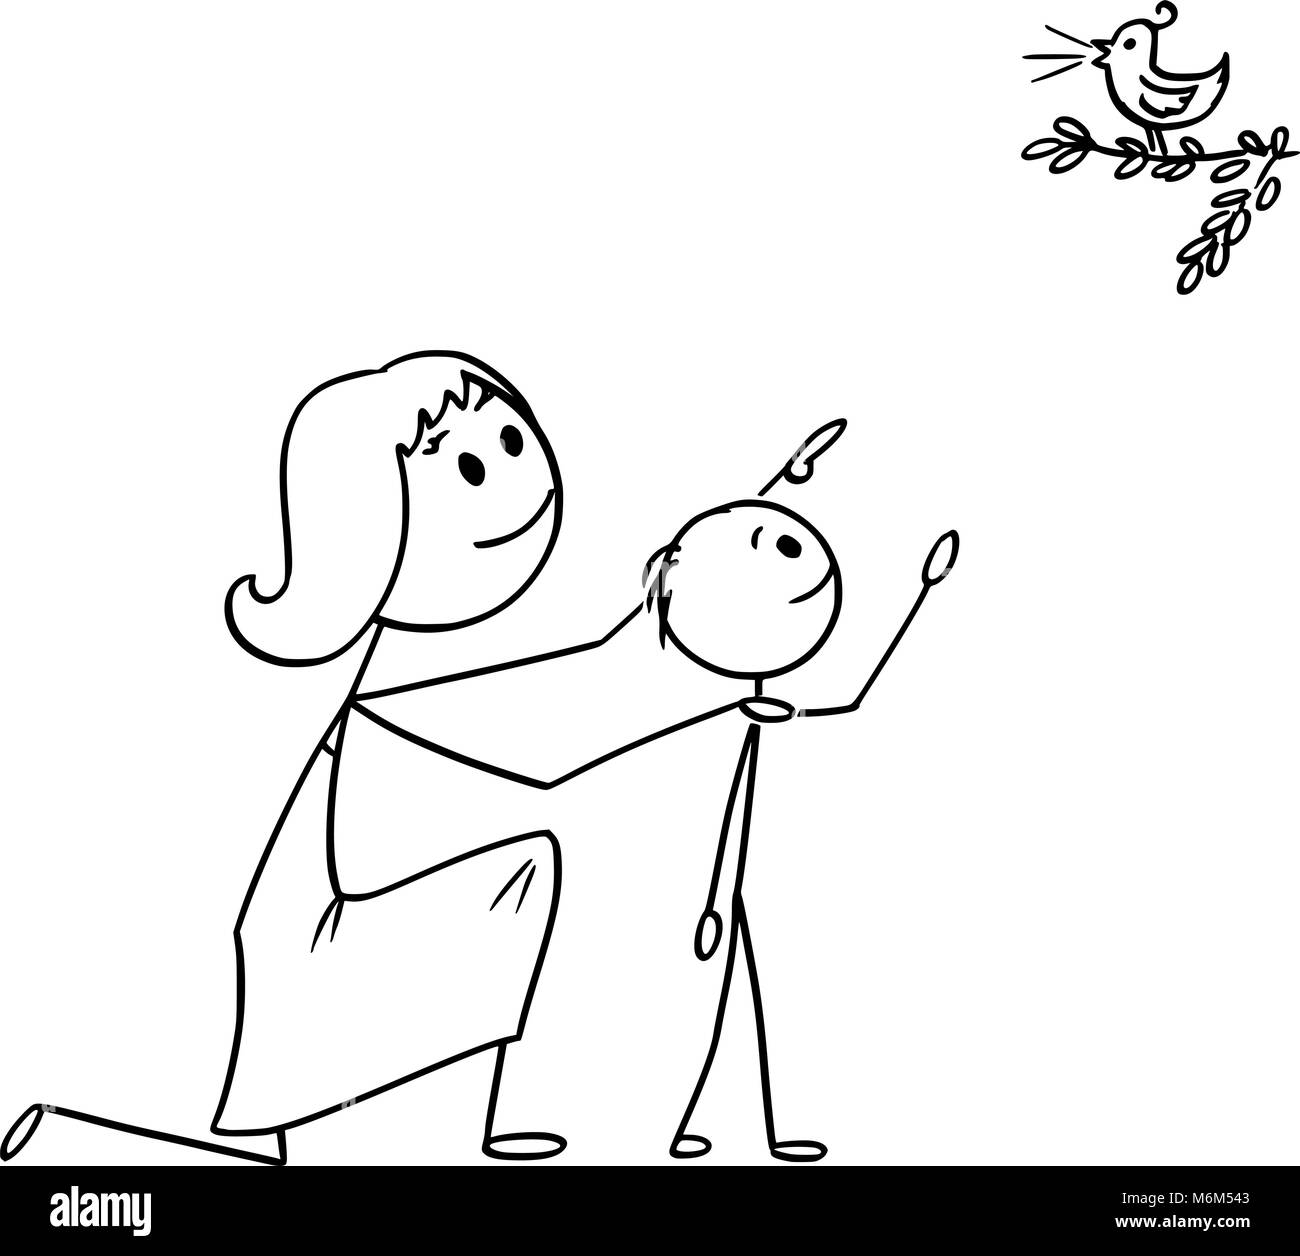 Cartoon of Mother and Son Watching a Wild Bird in Nature Stock Vector